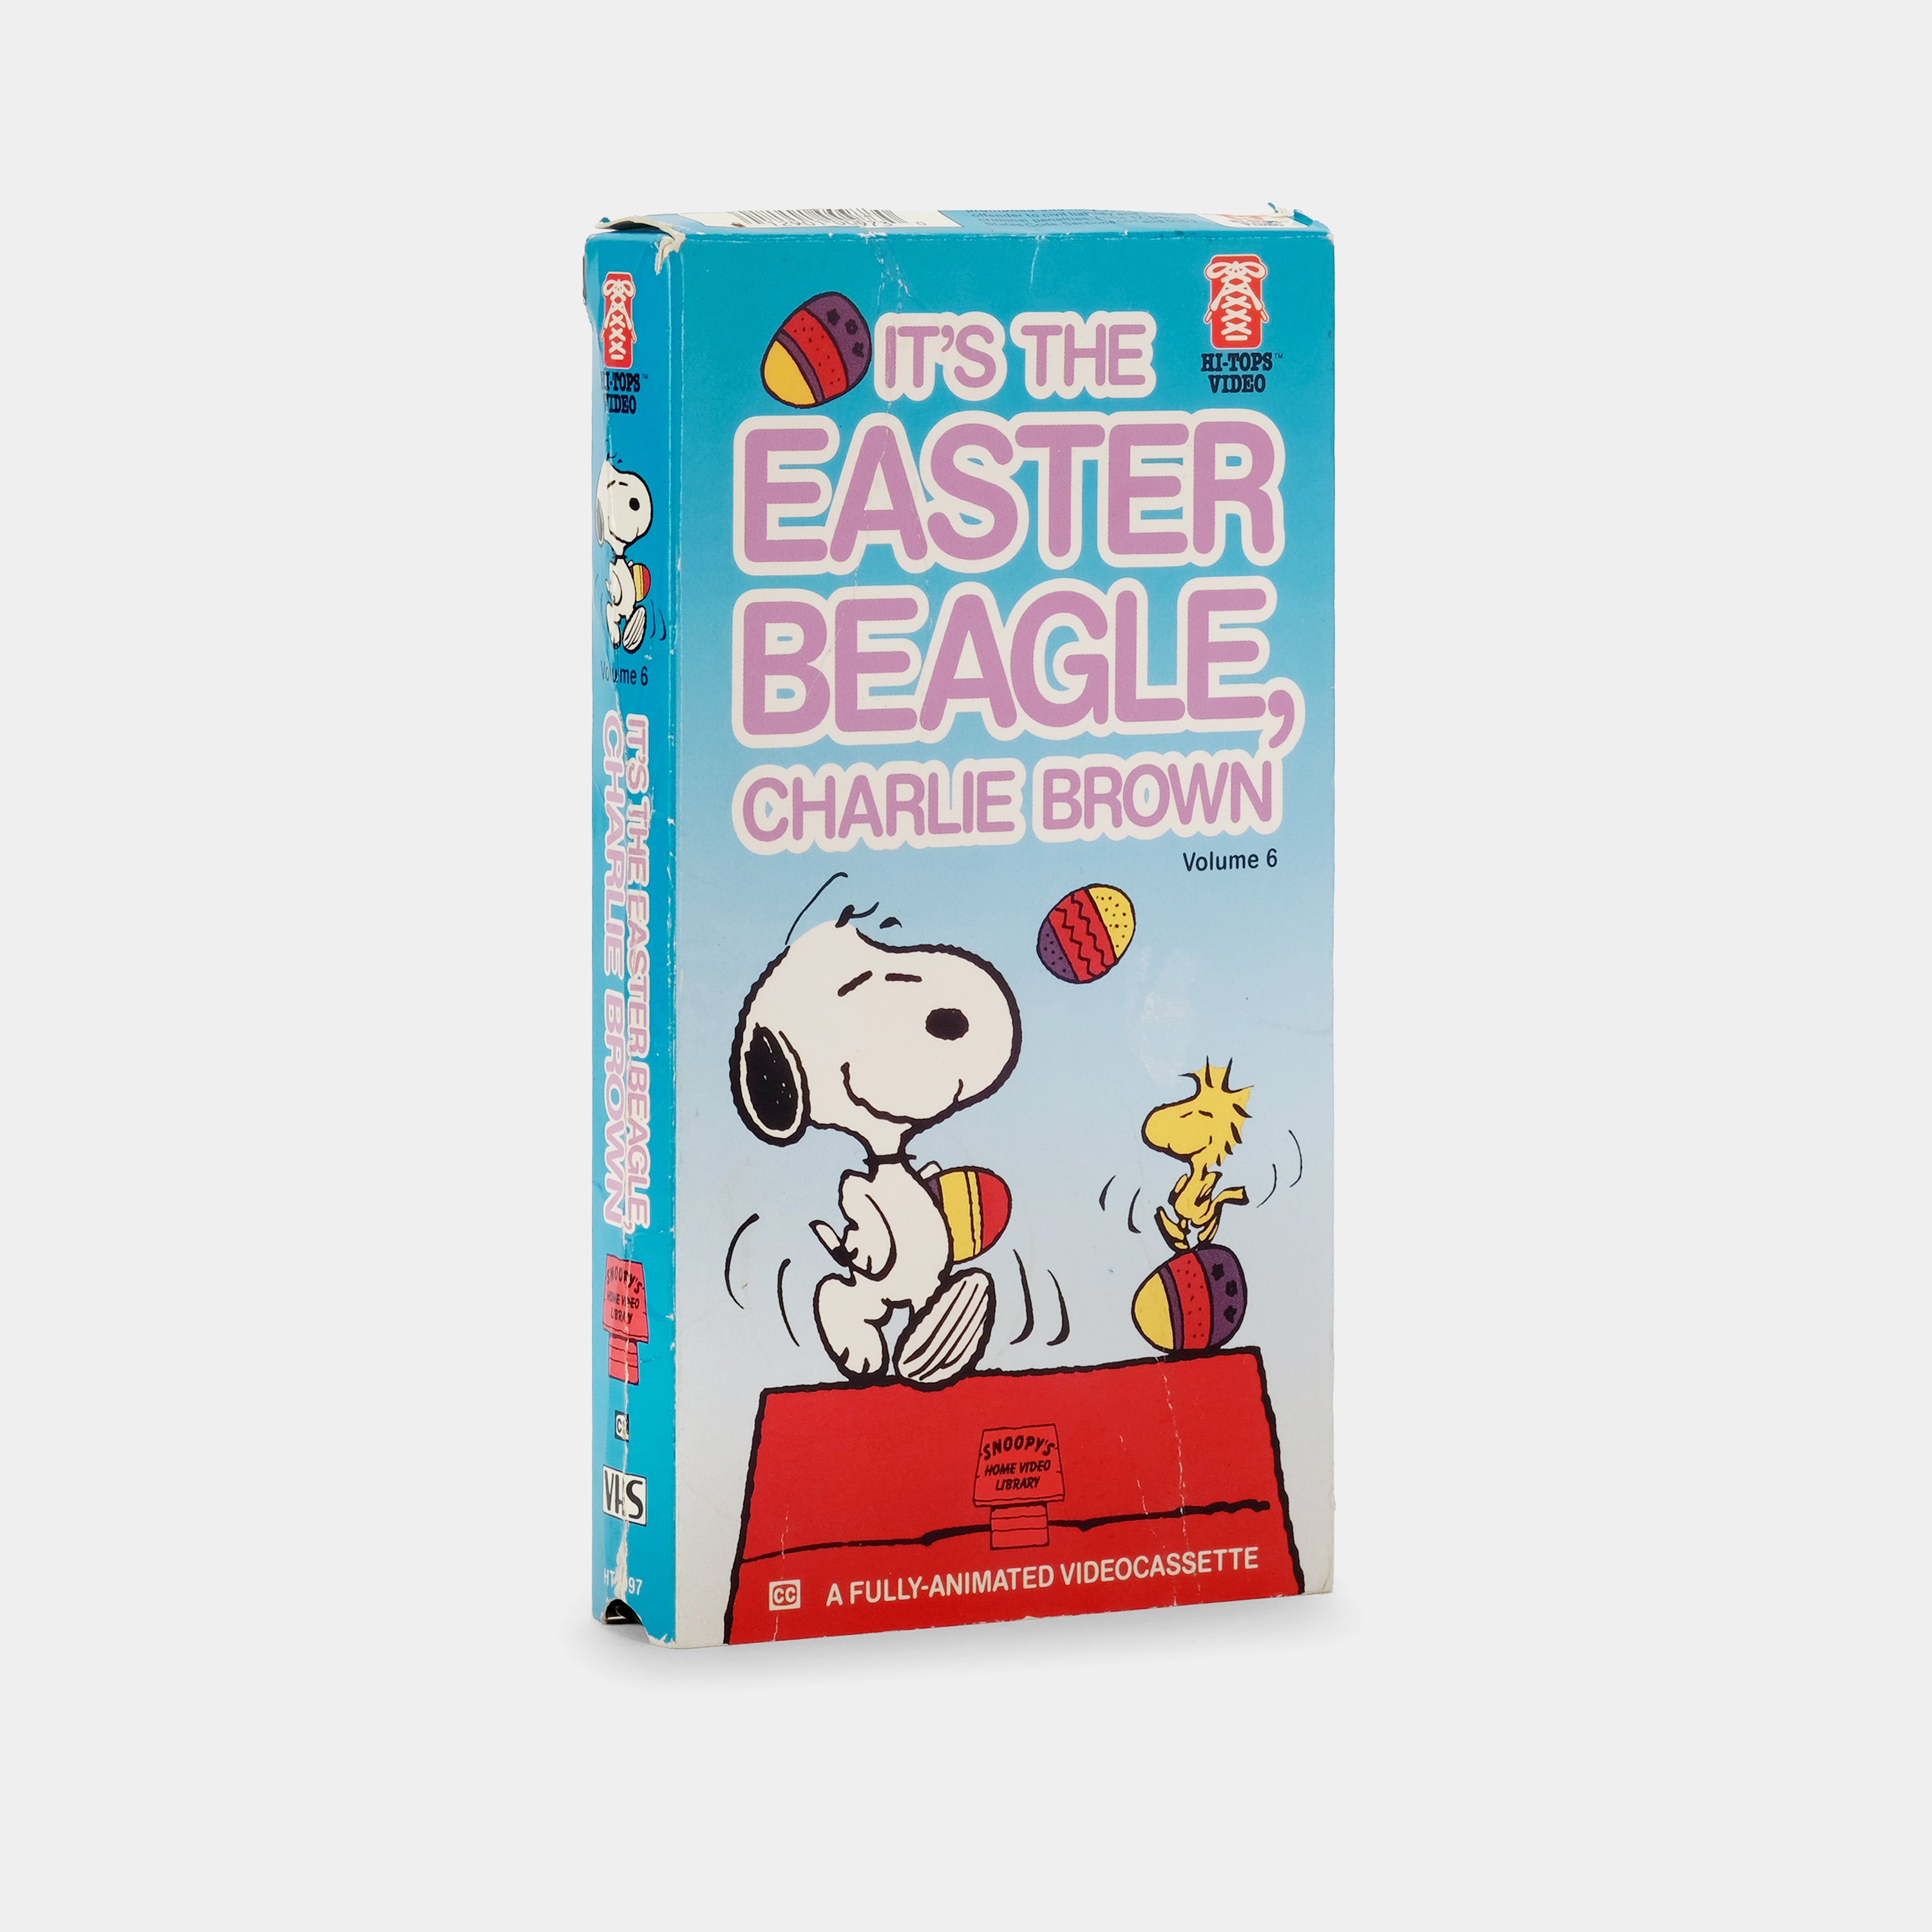 It's the Easter Beagle, Charlie Brown! VHS Tape